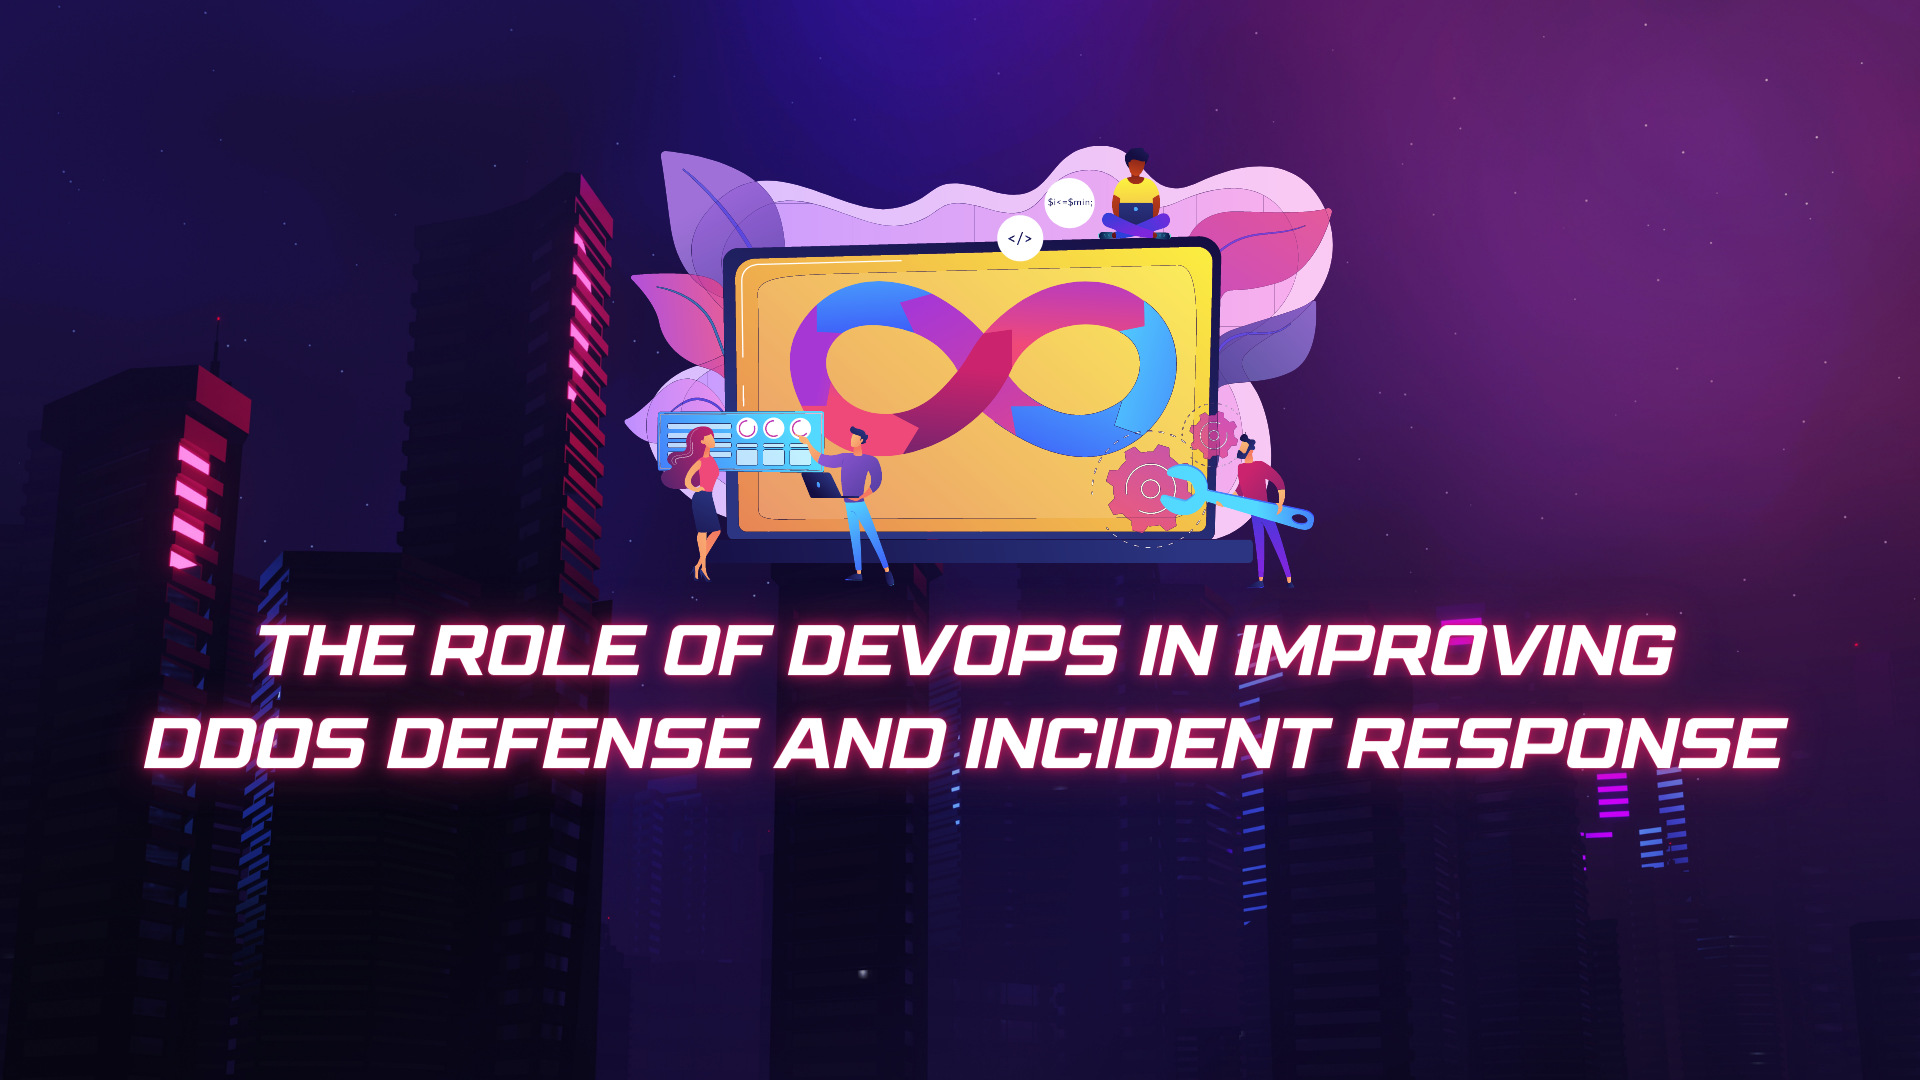 The role of DevOps in improving DDoS defense and incident response